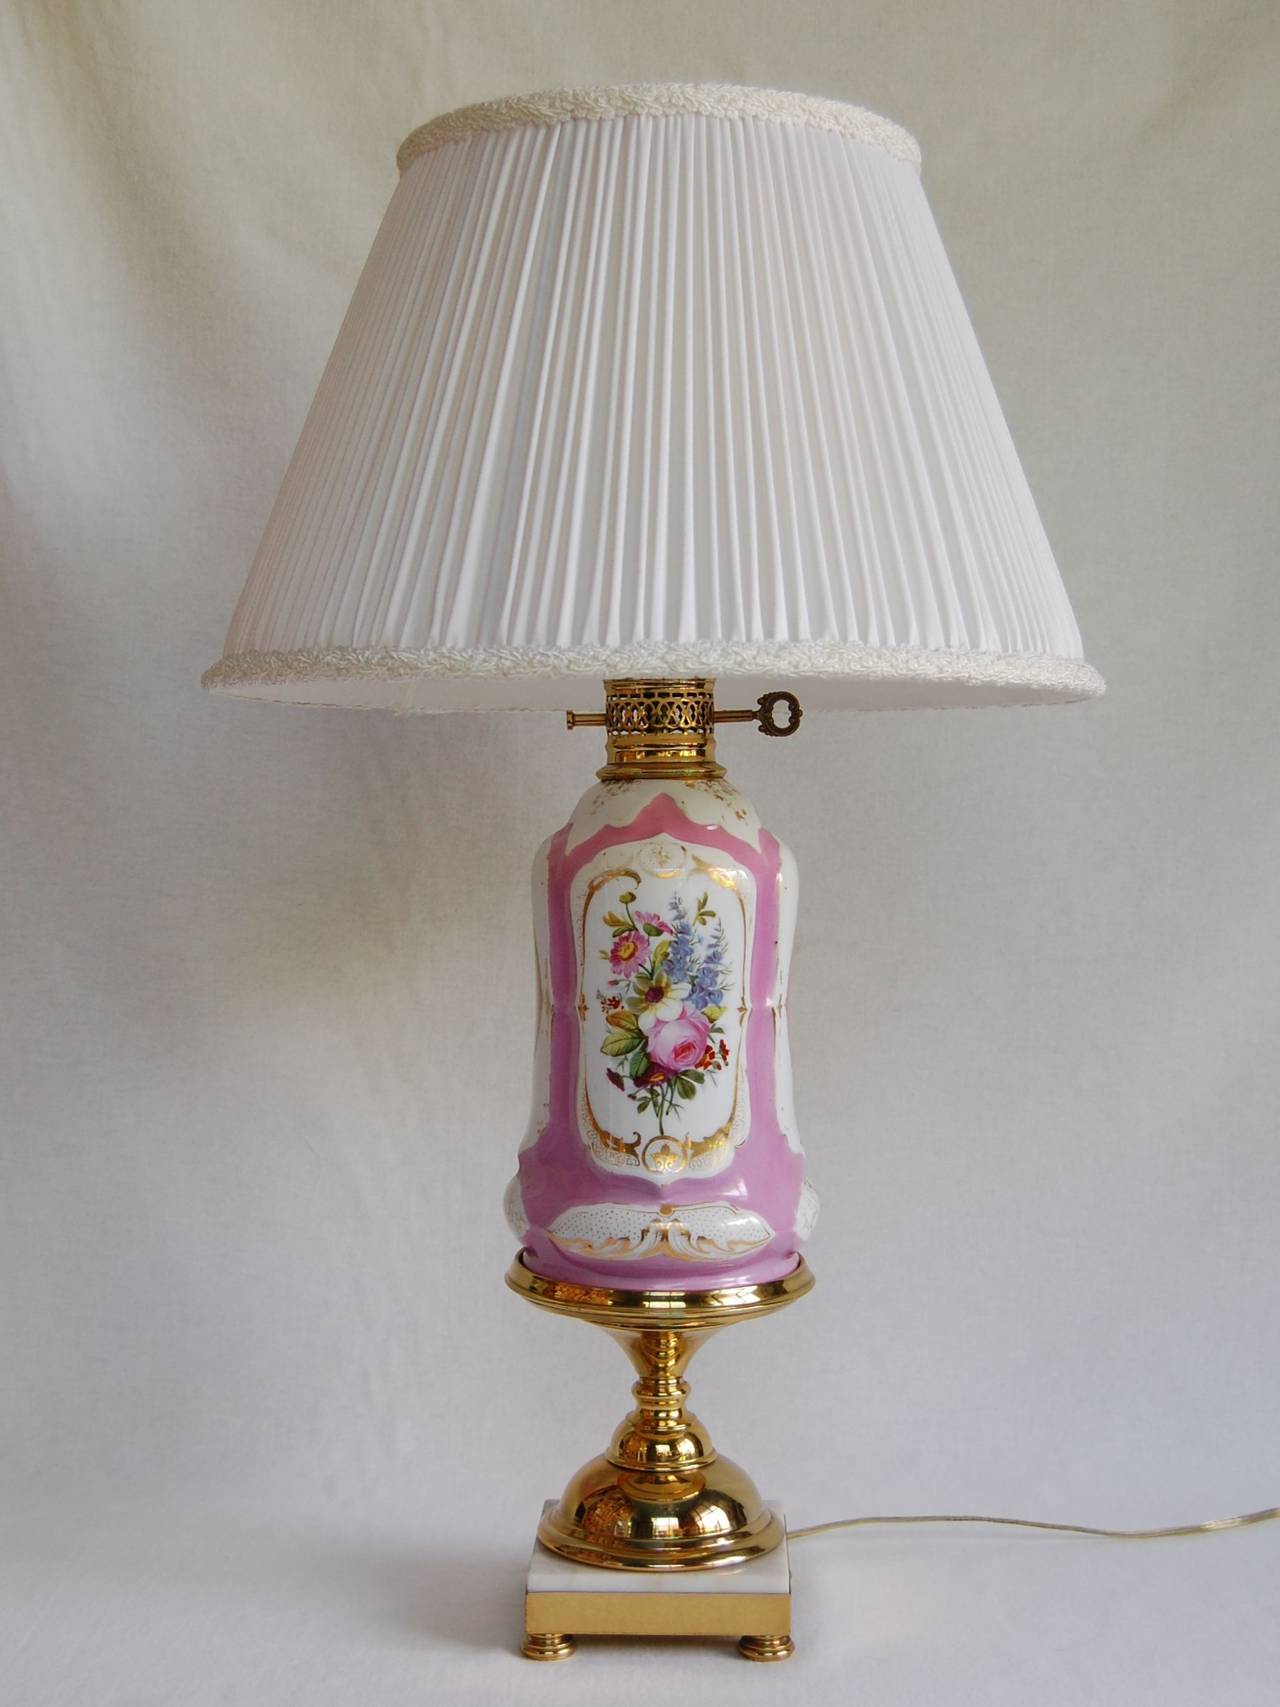 Paris porcelain floral-decorated oil table lamp on a tazza base (possibly not original base). Beautifully decorated in pink and gold with floral bouquets, resting on a polished brass column and marble base. Recently rewired, cleaned, and polished.